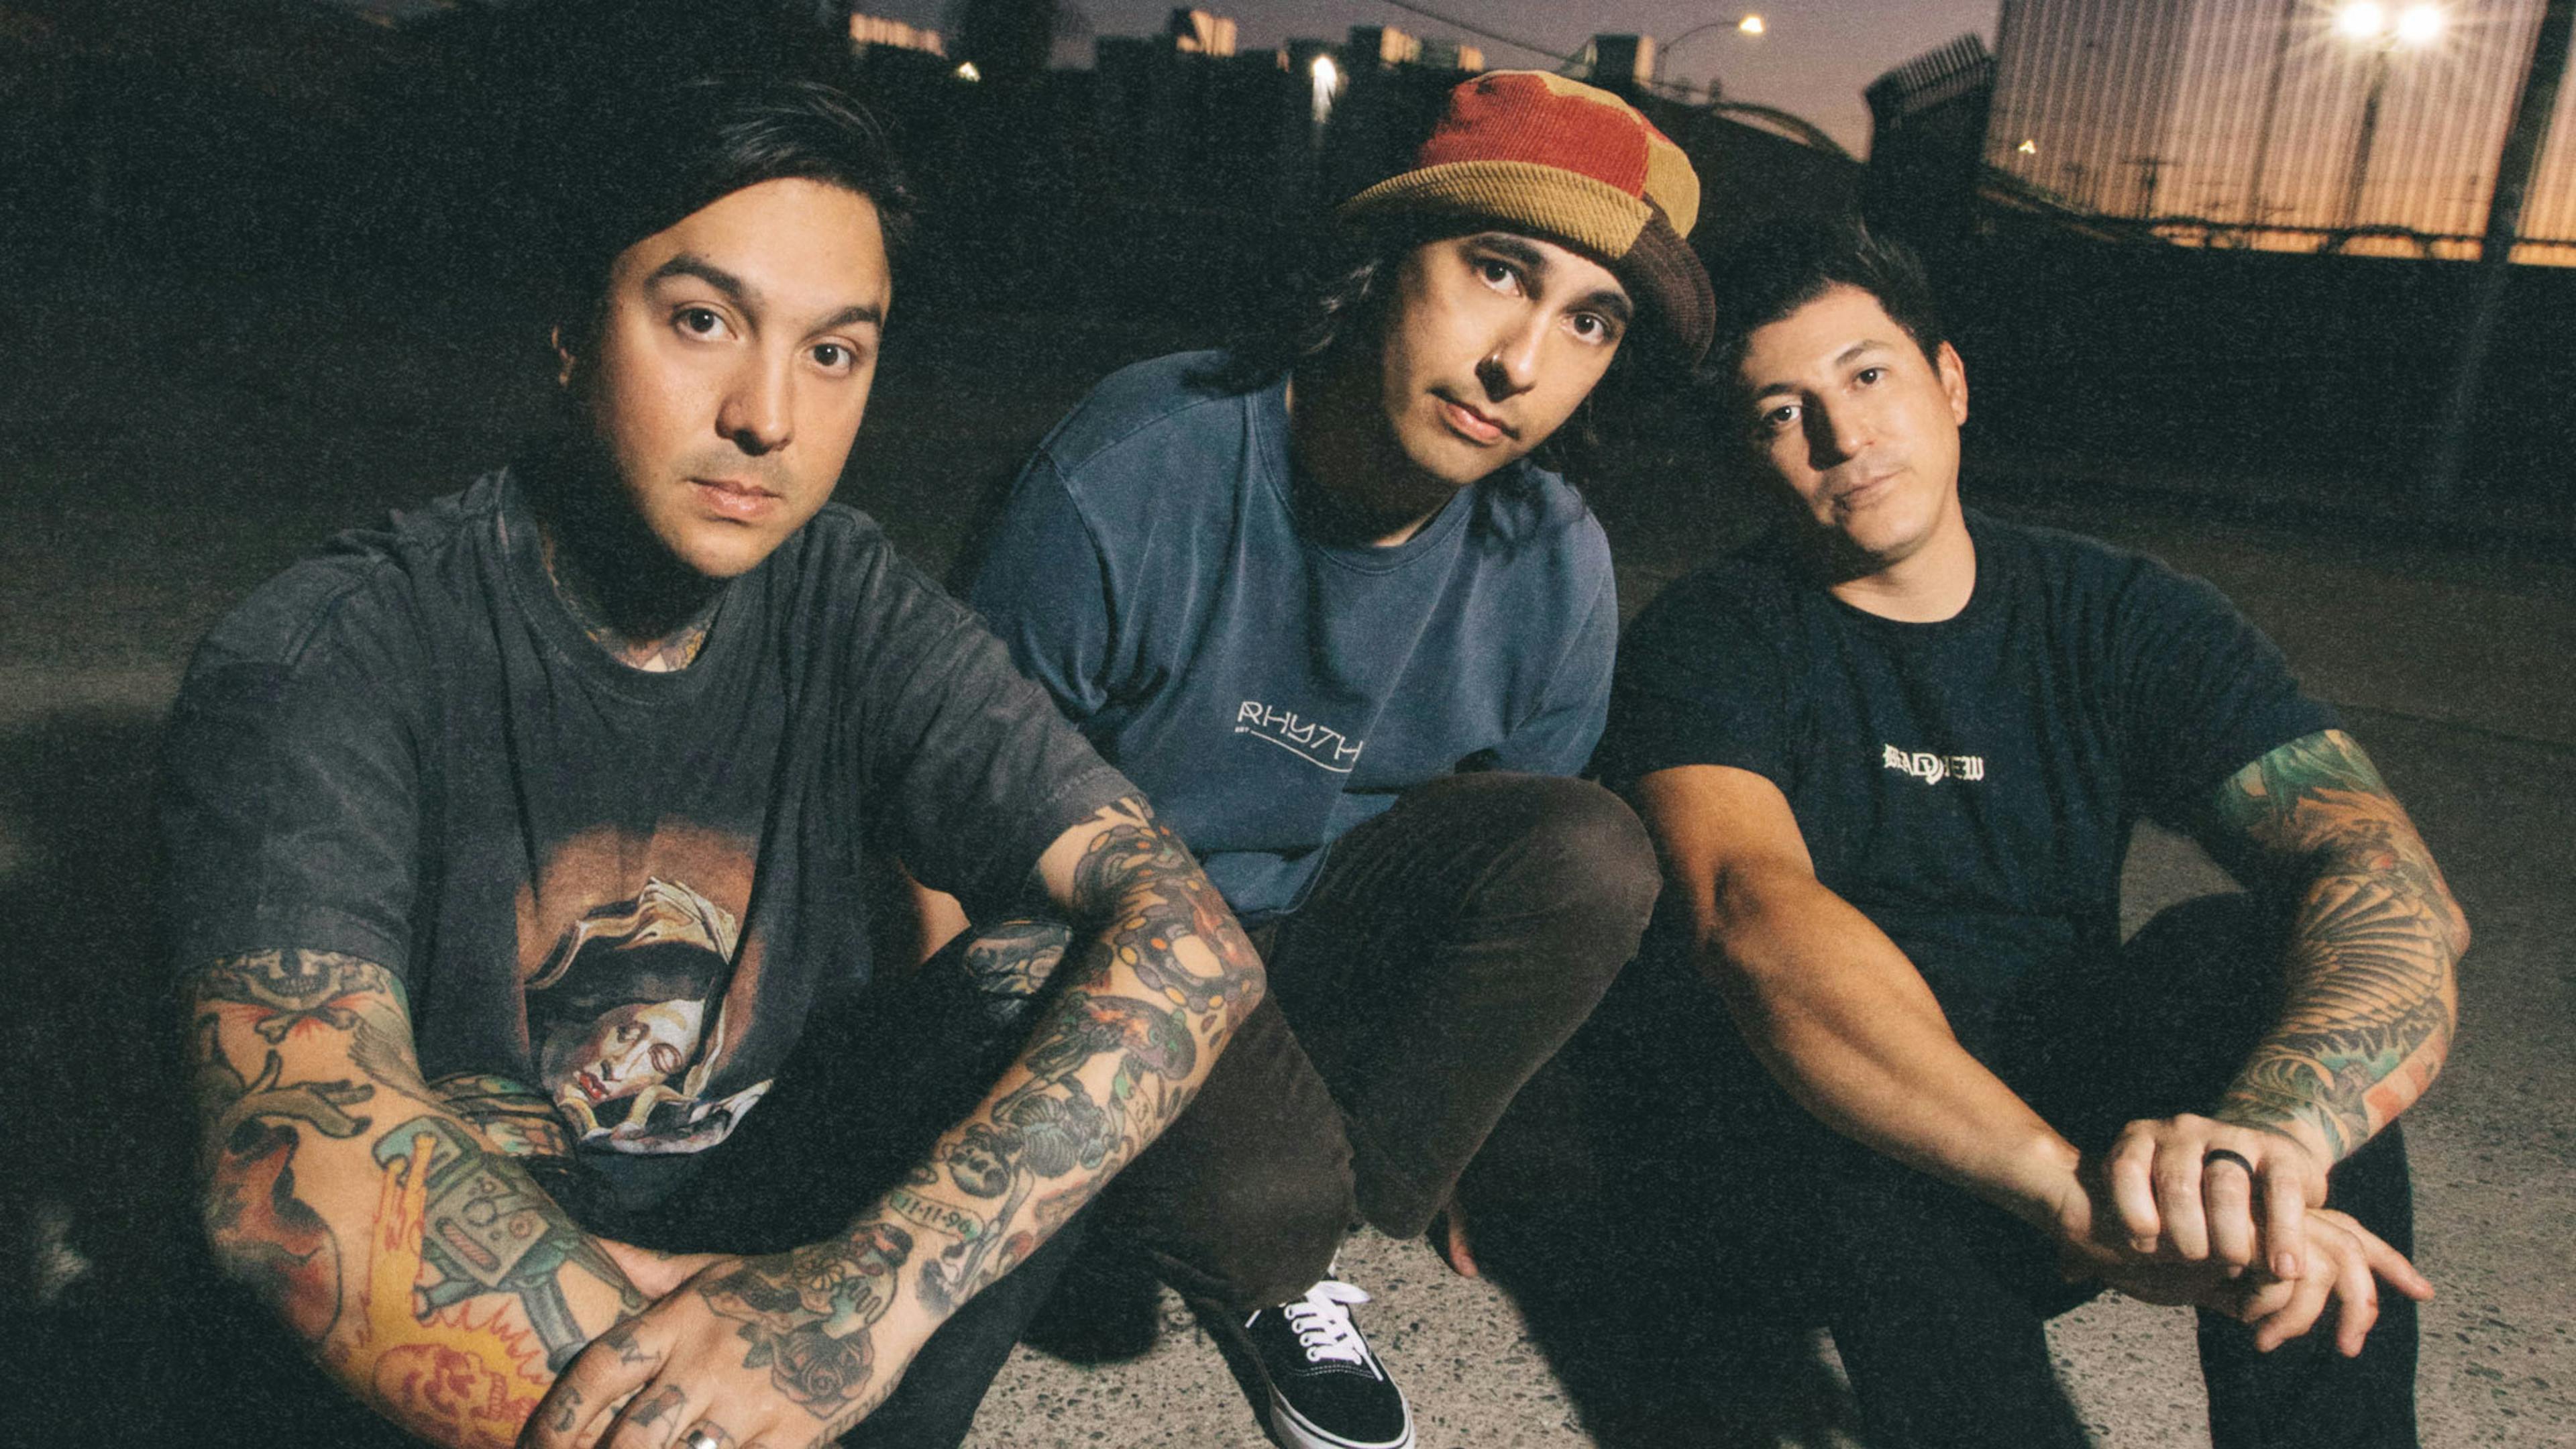 Here’s the setlist from Pierce The Veil’s UK arena tour